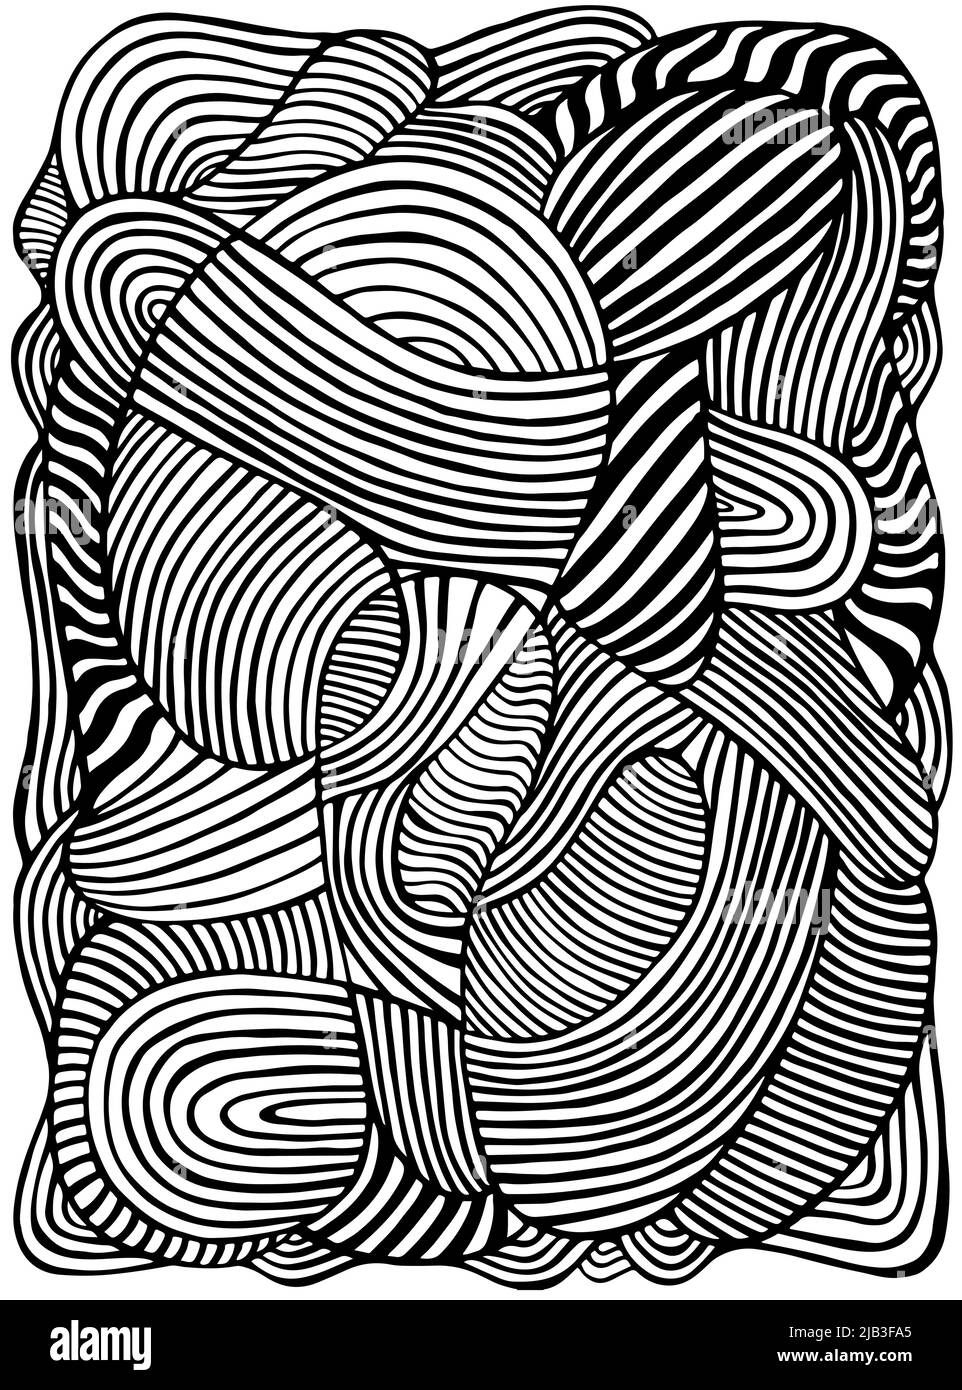 Tabby psychedelic coloring page. Fantastic art with decorative striped texture. Surreal doodle pattern. Black and white abstract pattern, maze wave of Stock Vector